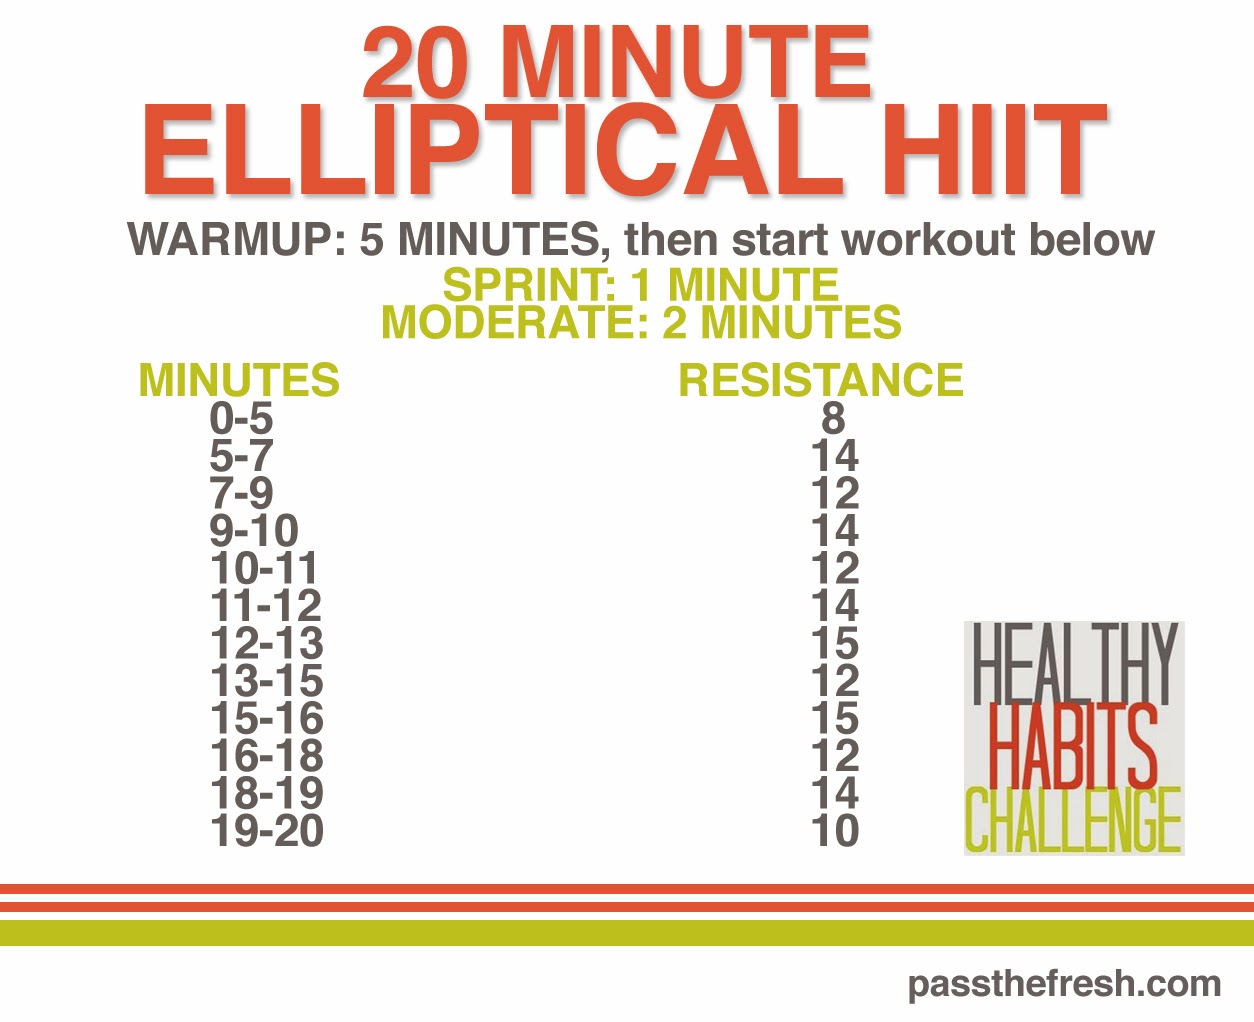  20 minute elliptical workout for Push Pull Legs